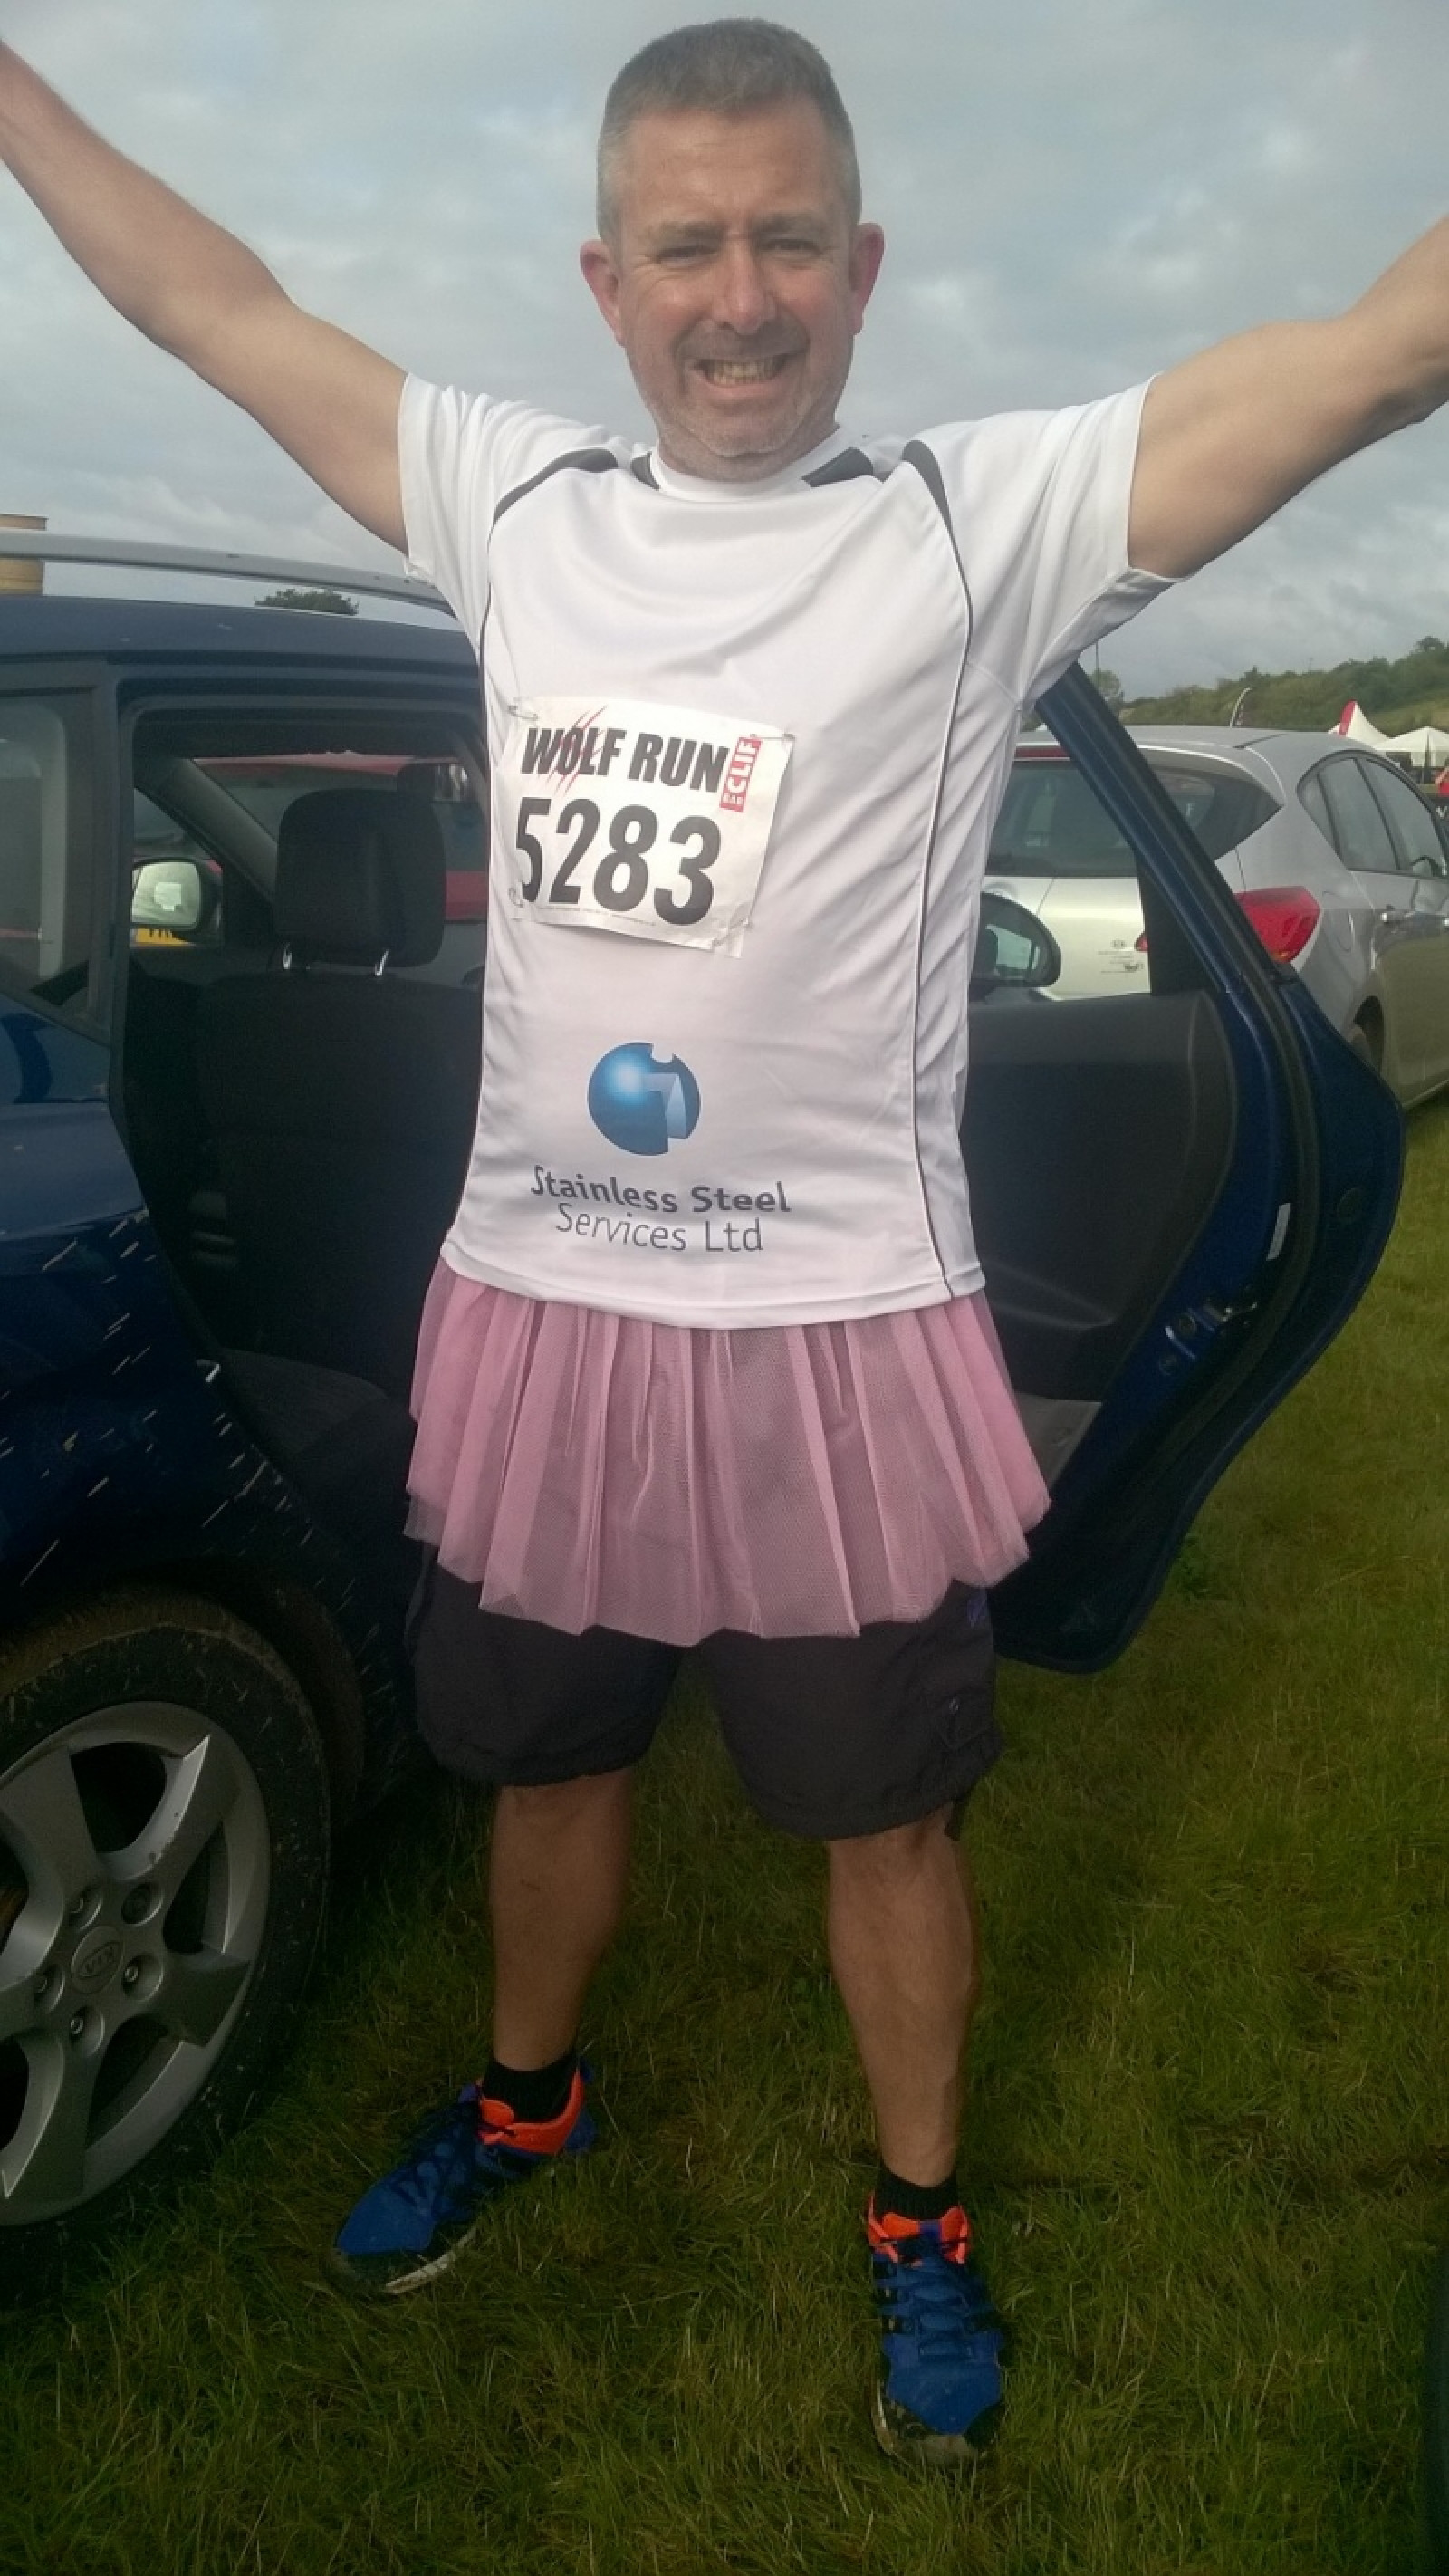 The Wolf Run completed by Jon Rowley in a tutu